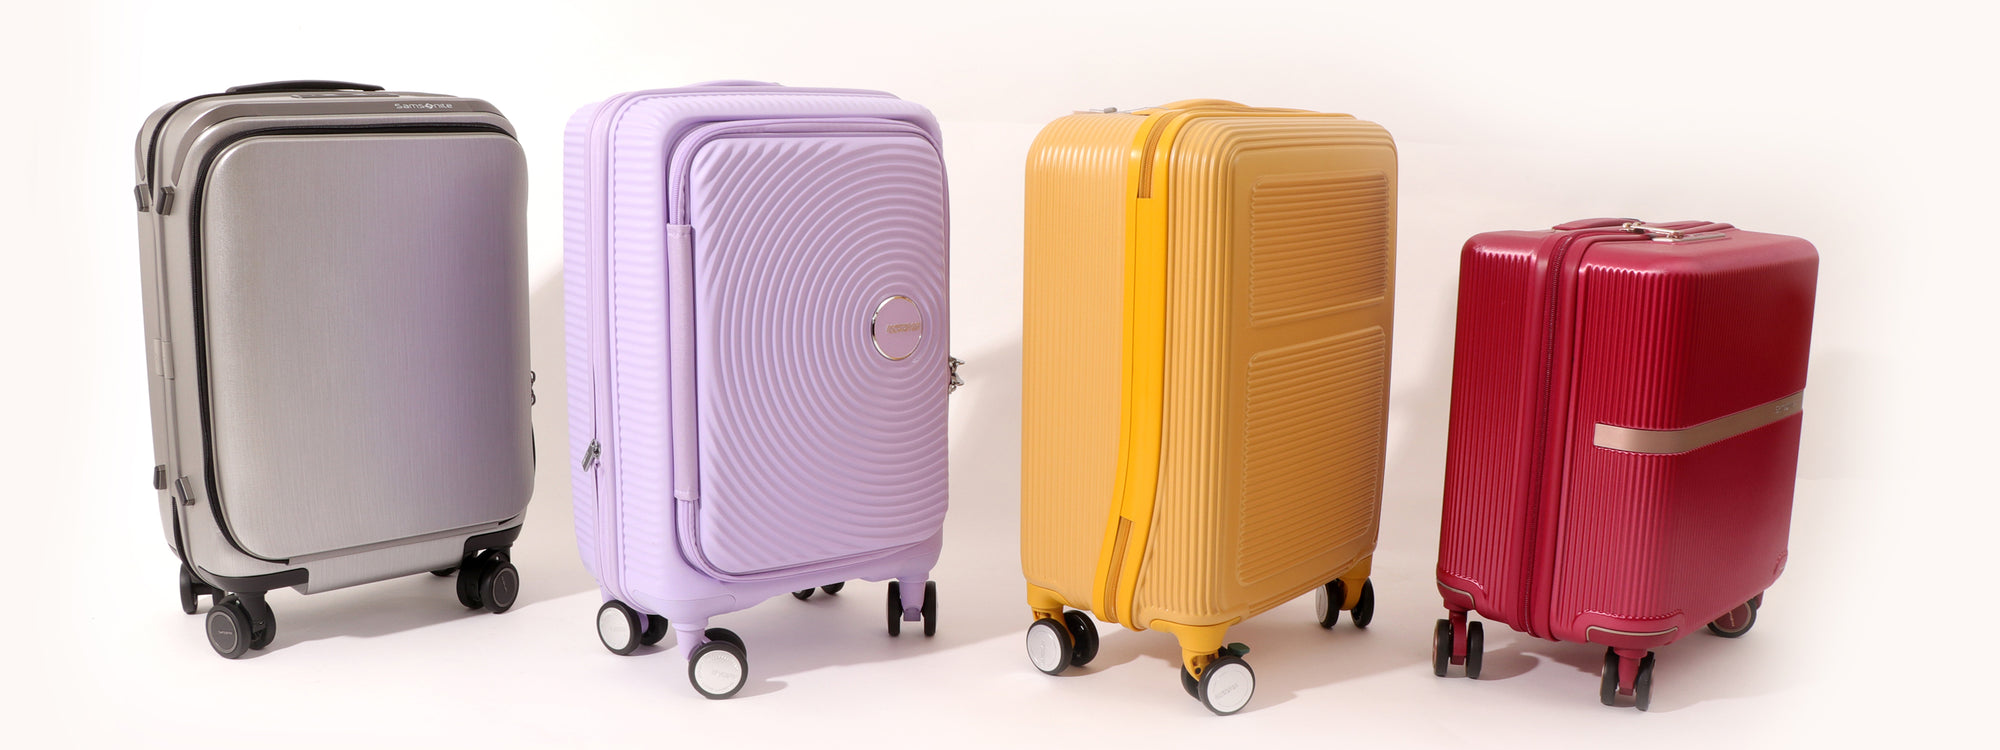 Luggage and travel - Rustans.com